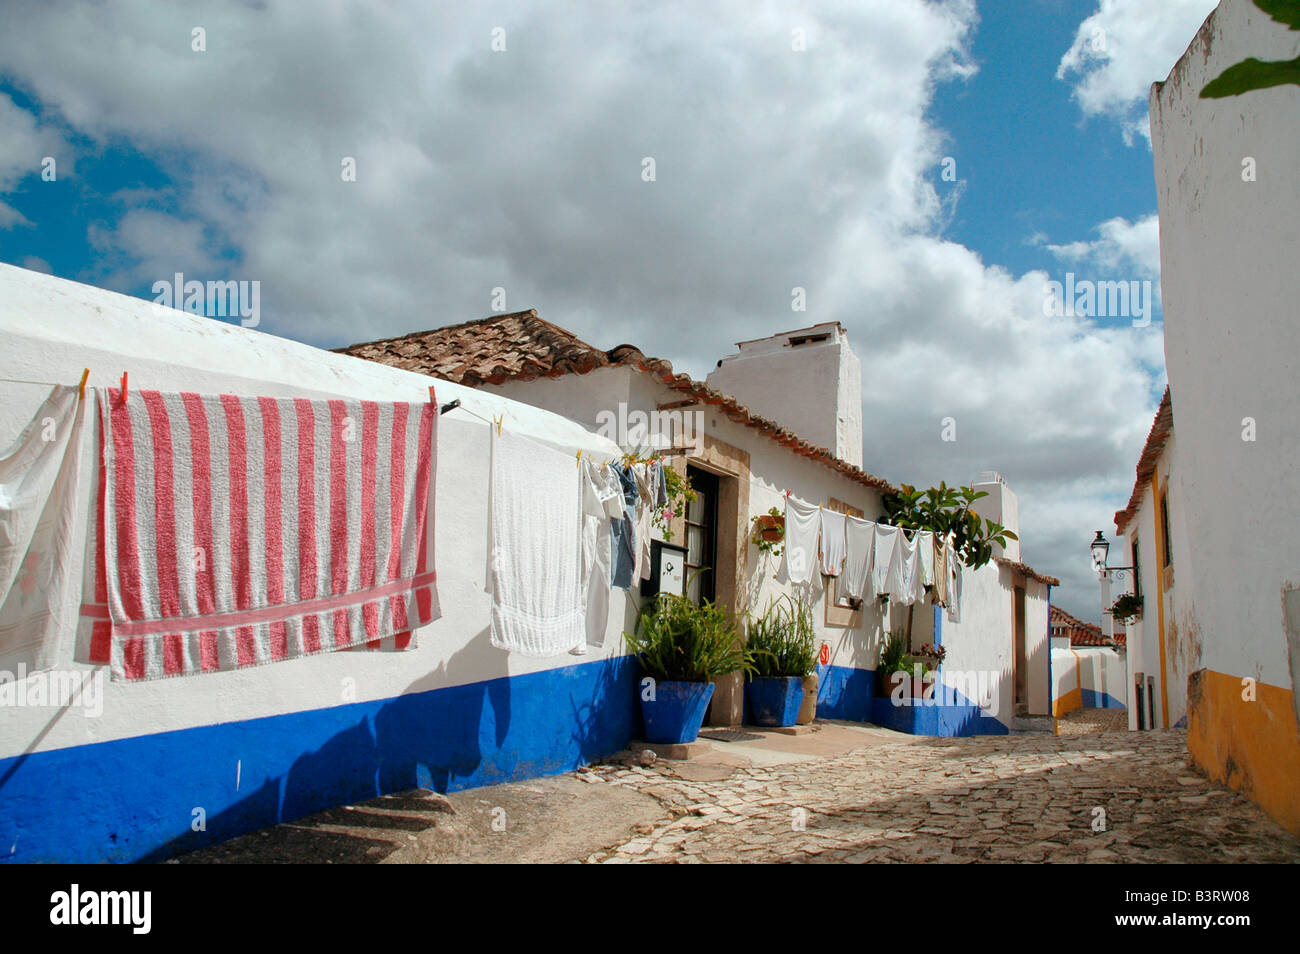 A street scene within the preserved medieval town of Obidos, Portugal. Stock Photo